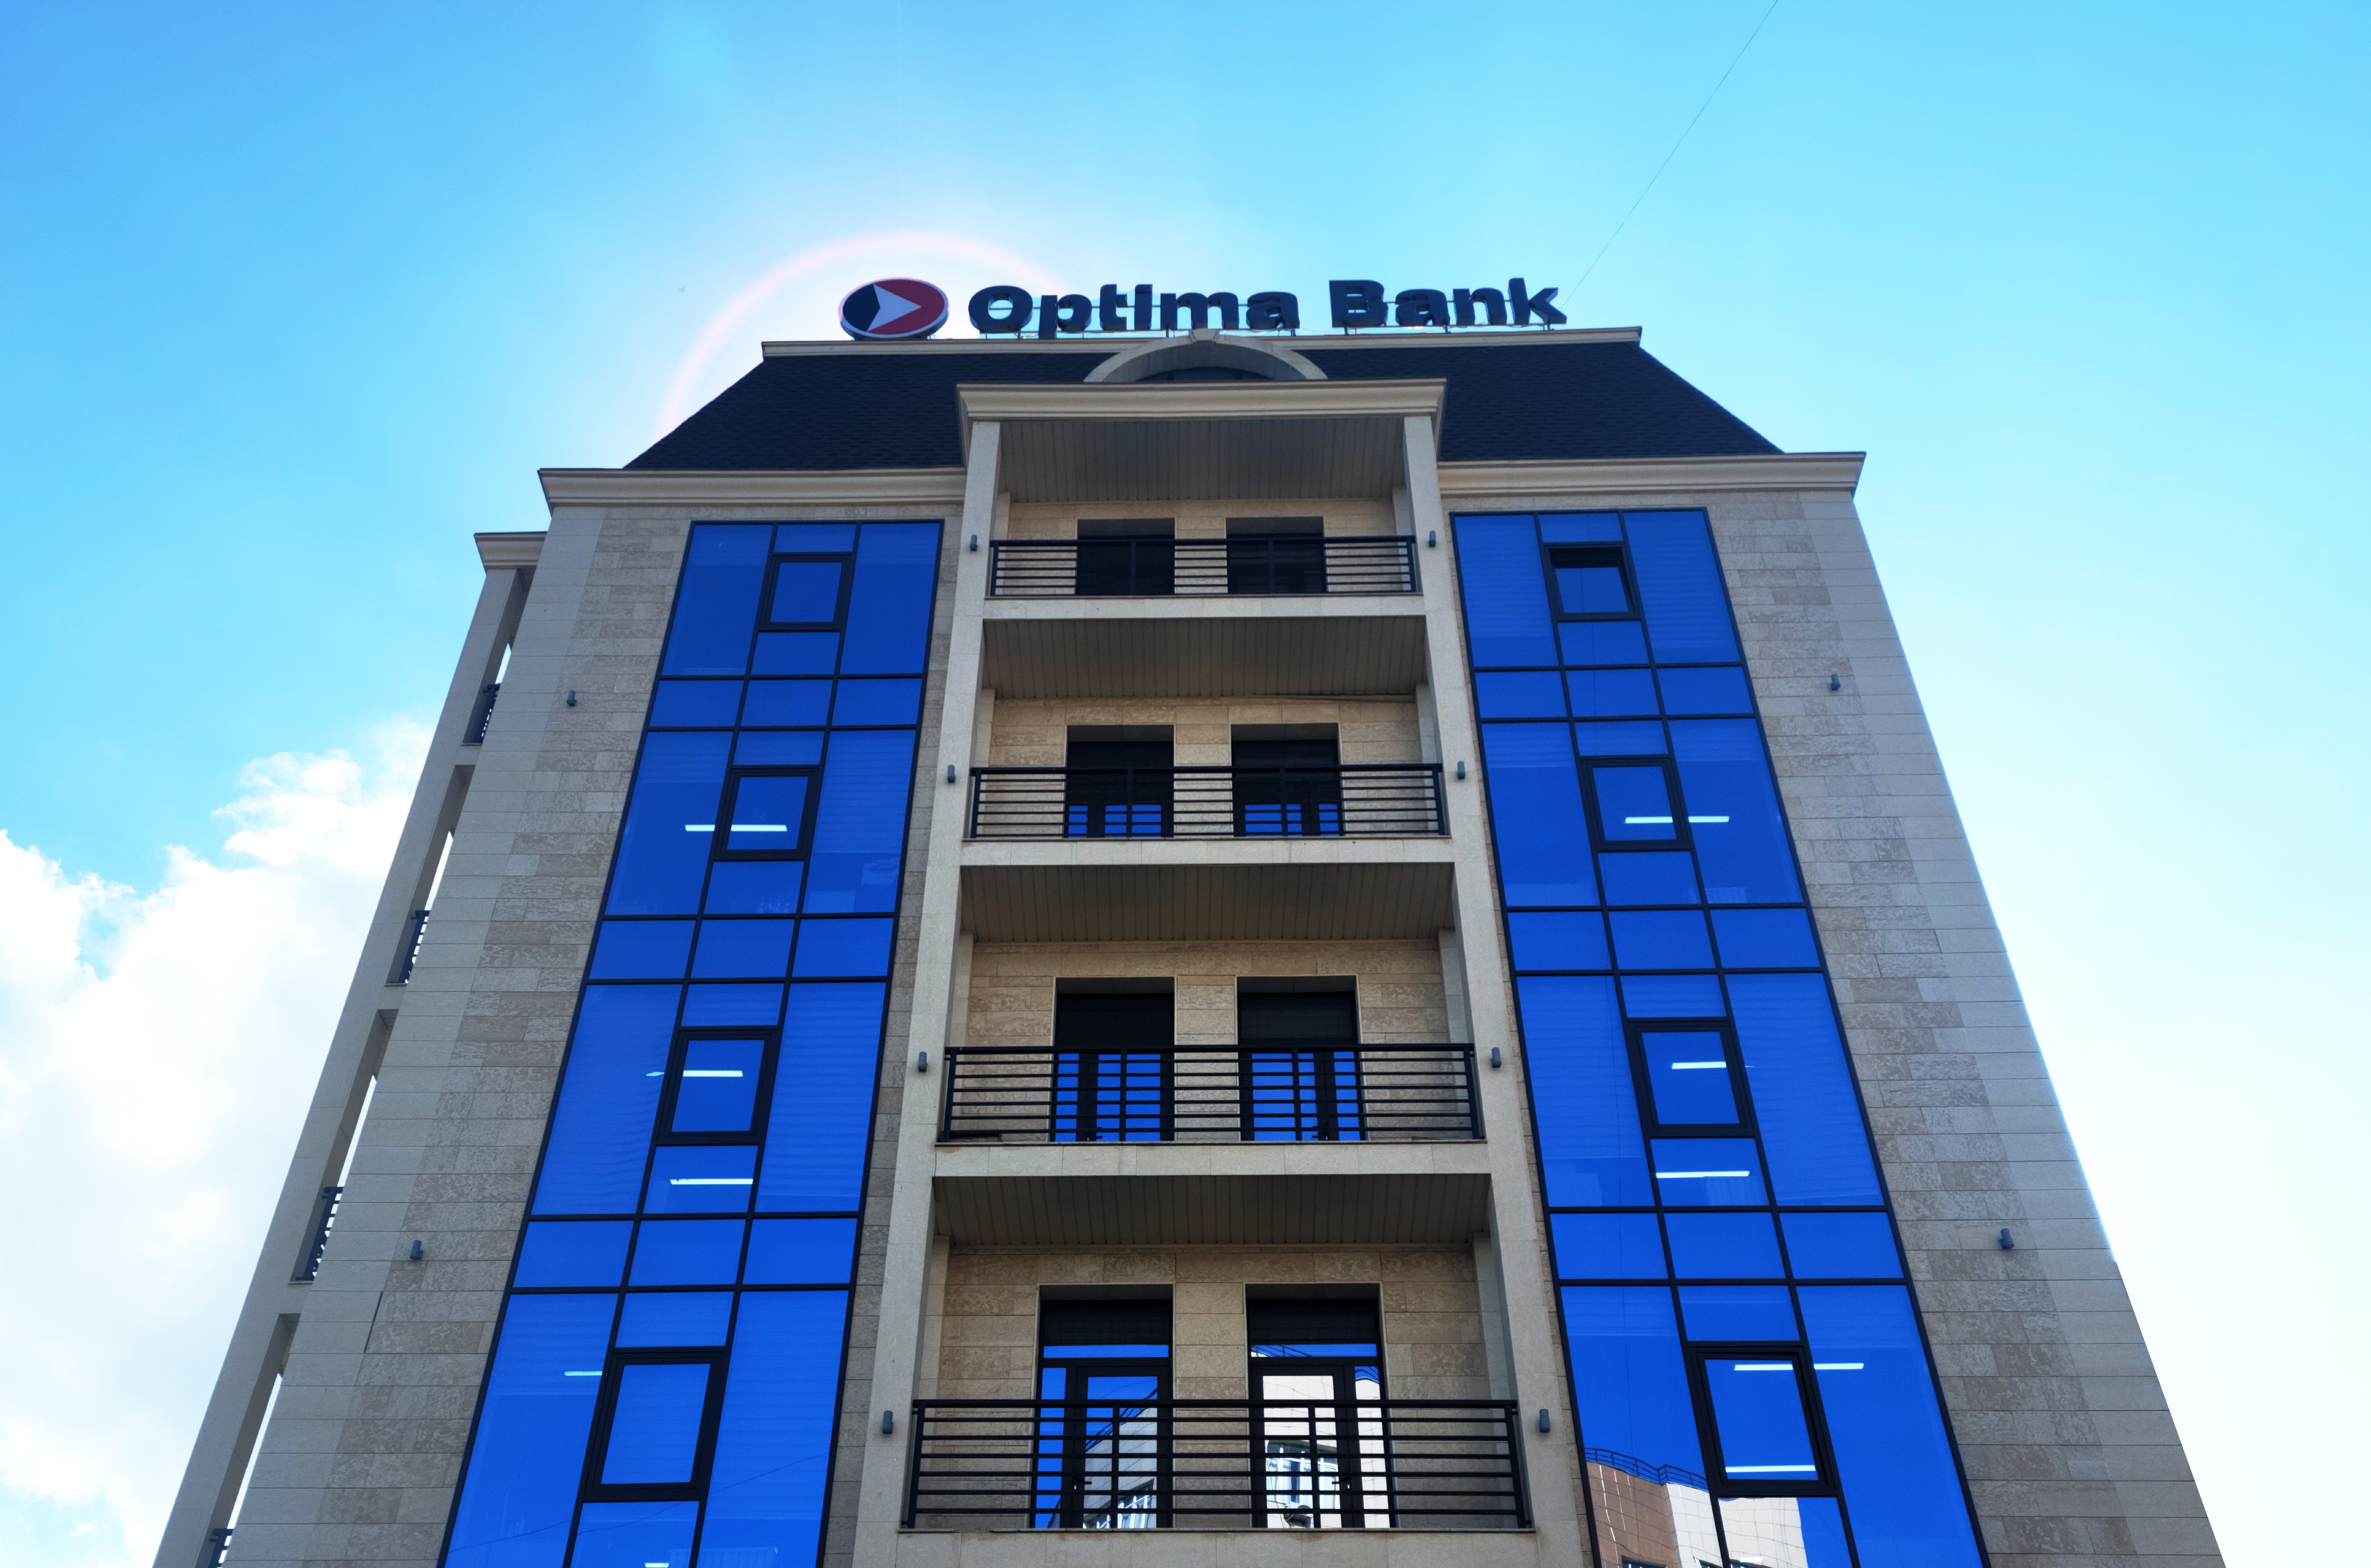 Optima Bank is the new Partner of Astrasend MT System!